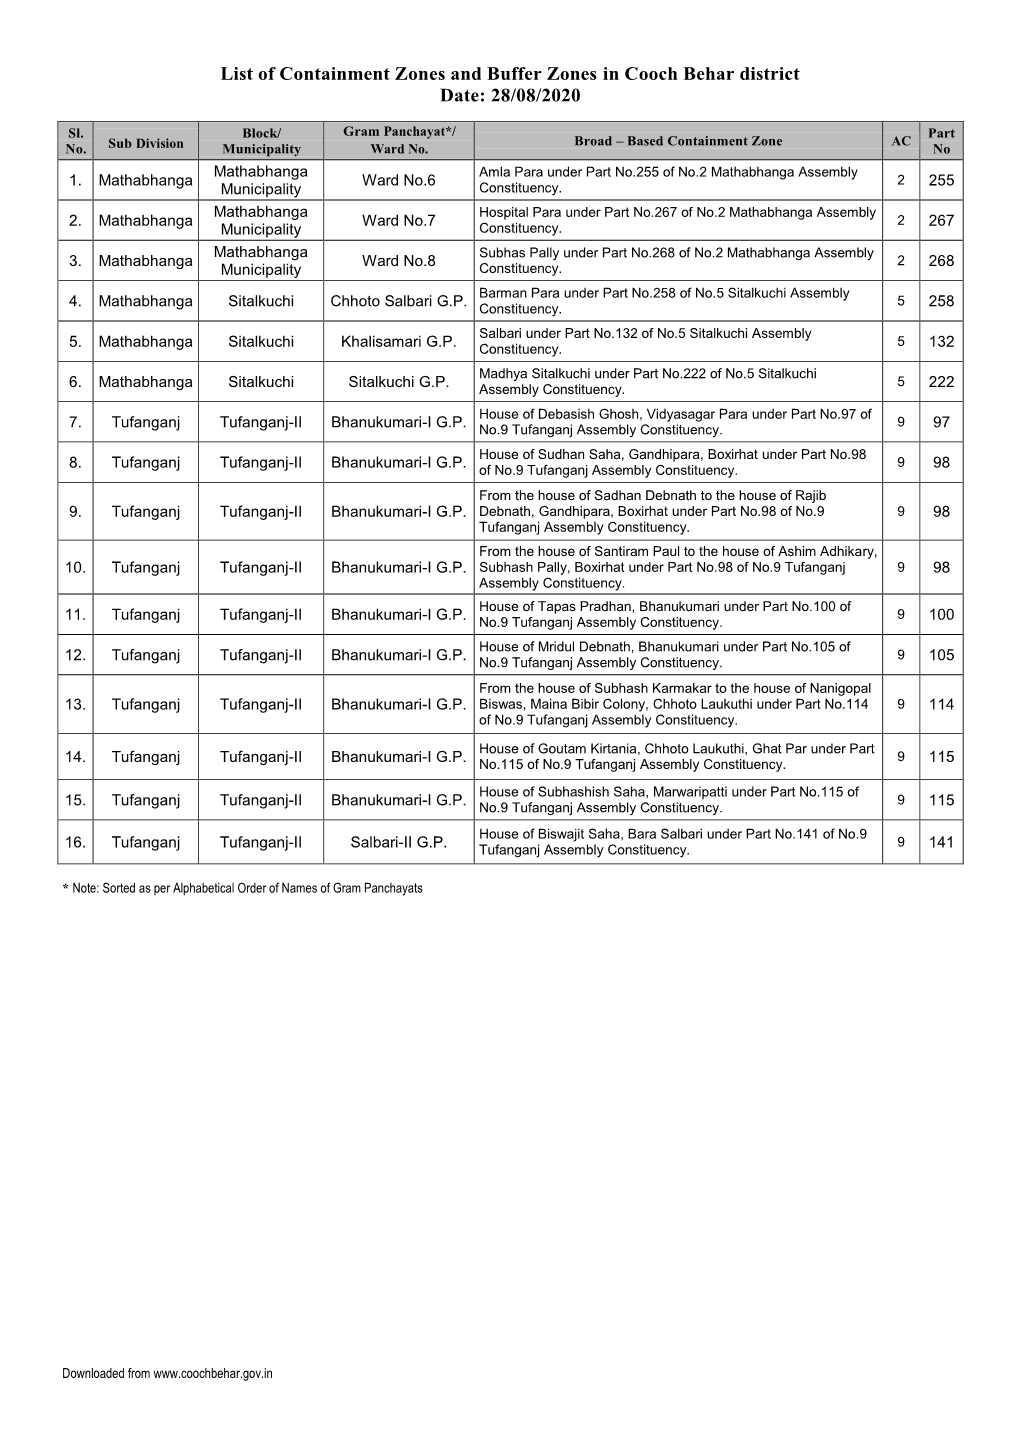 List of Containment Zones and Buffer Zones in Cooch Behar District Date: 28/08/2020